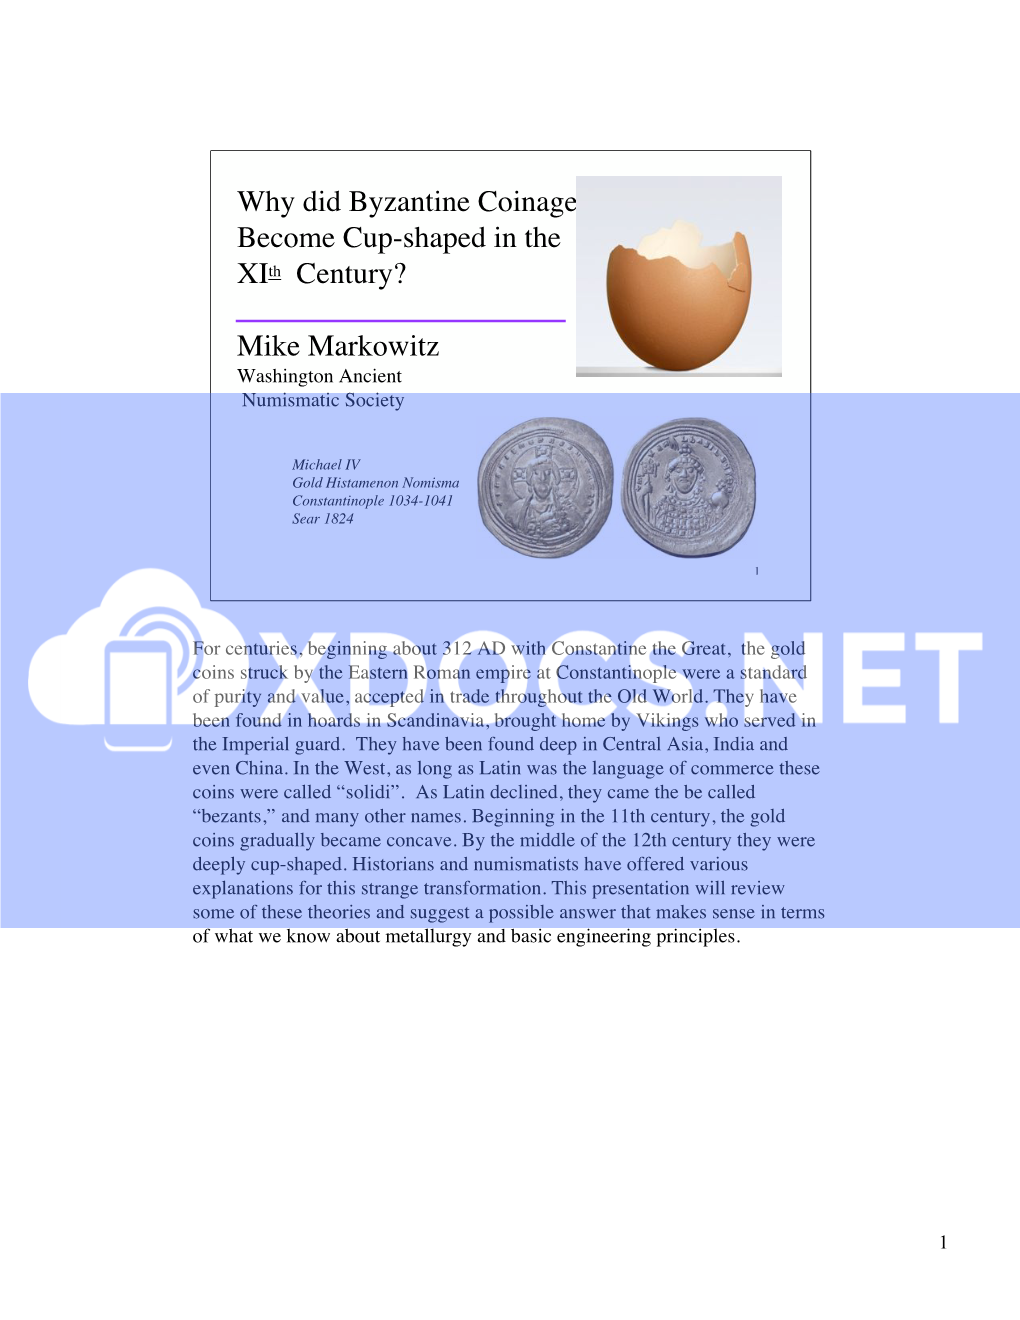 Why Did Byzantine Coinage Become Cup-Shaped in the Xith Century?